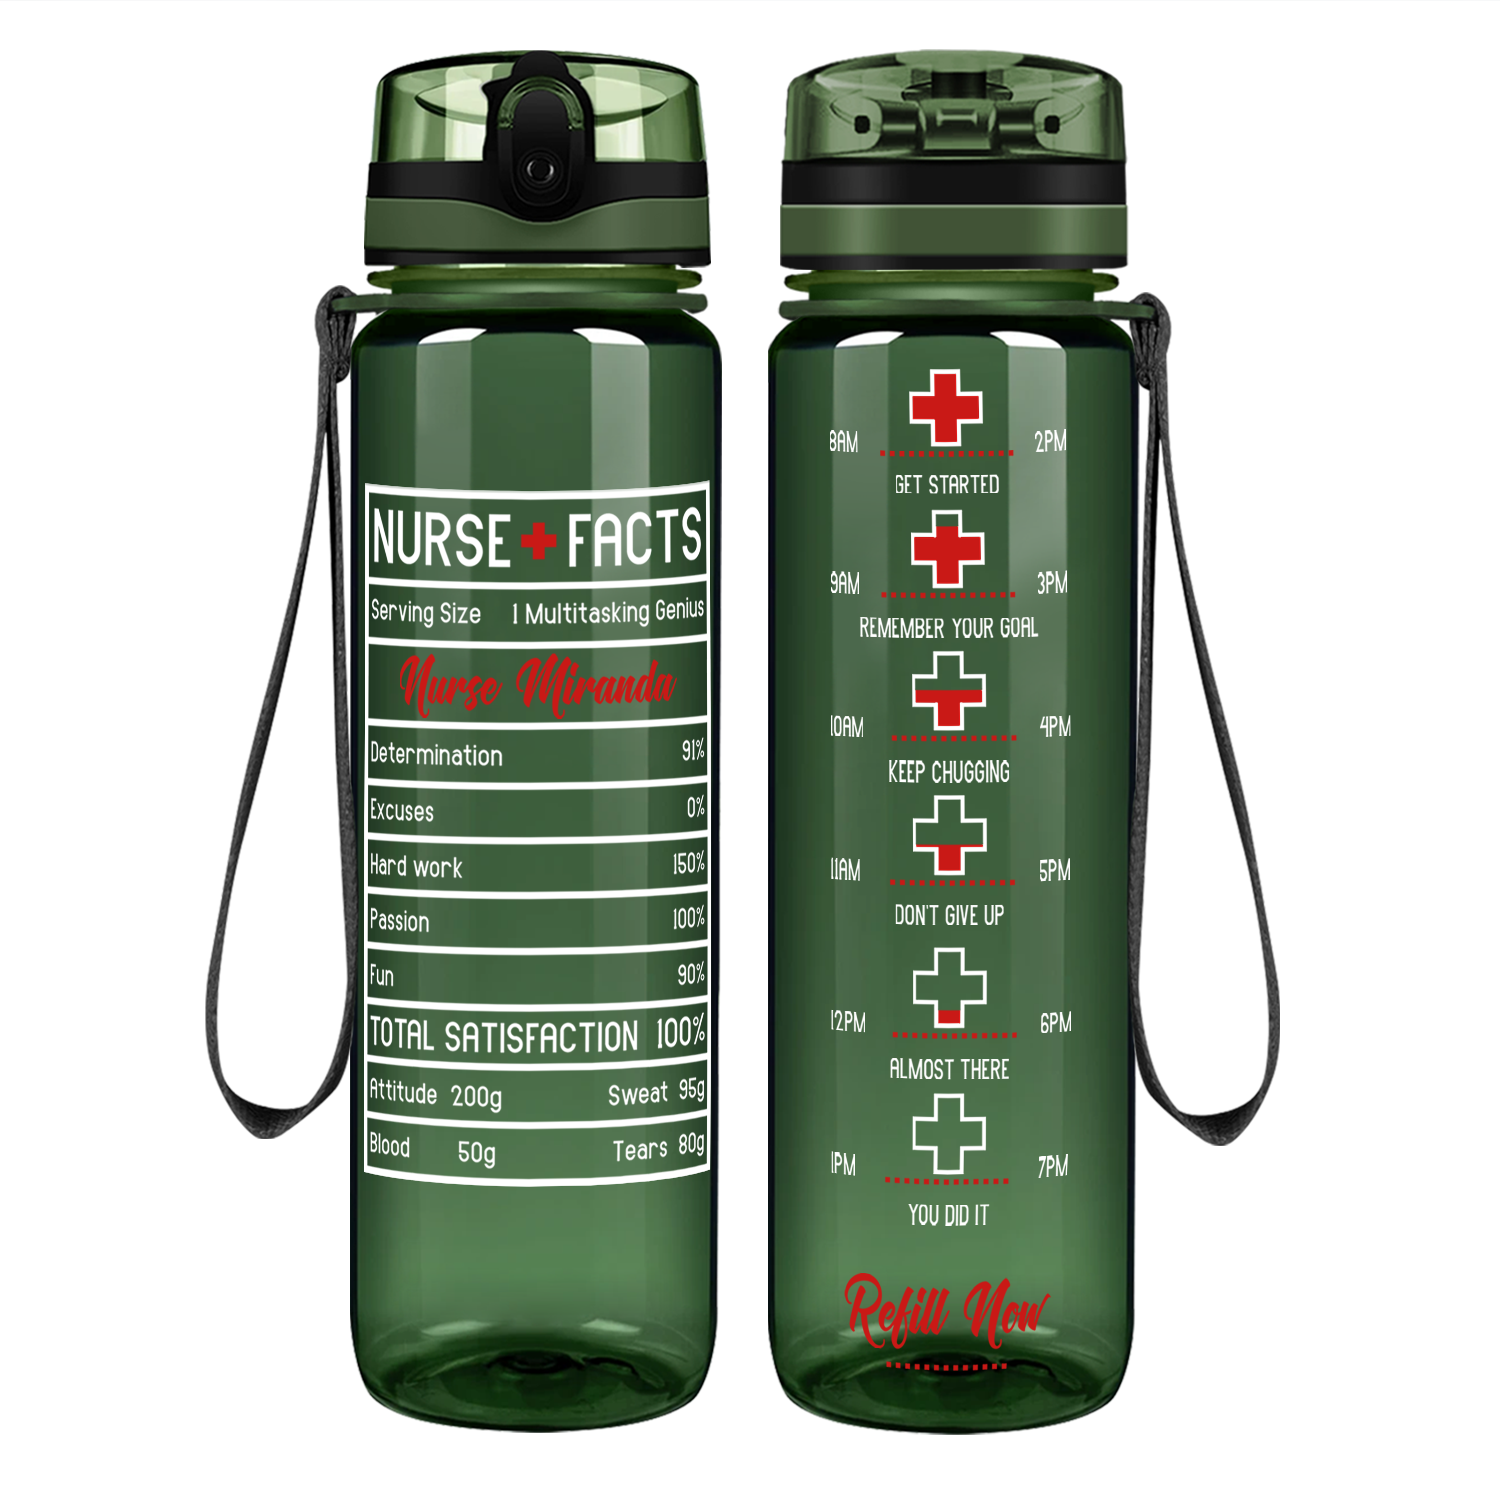 Personalized Nurse Facts on 32oz Motivational Tracking Water Bottle